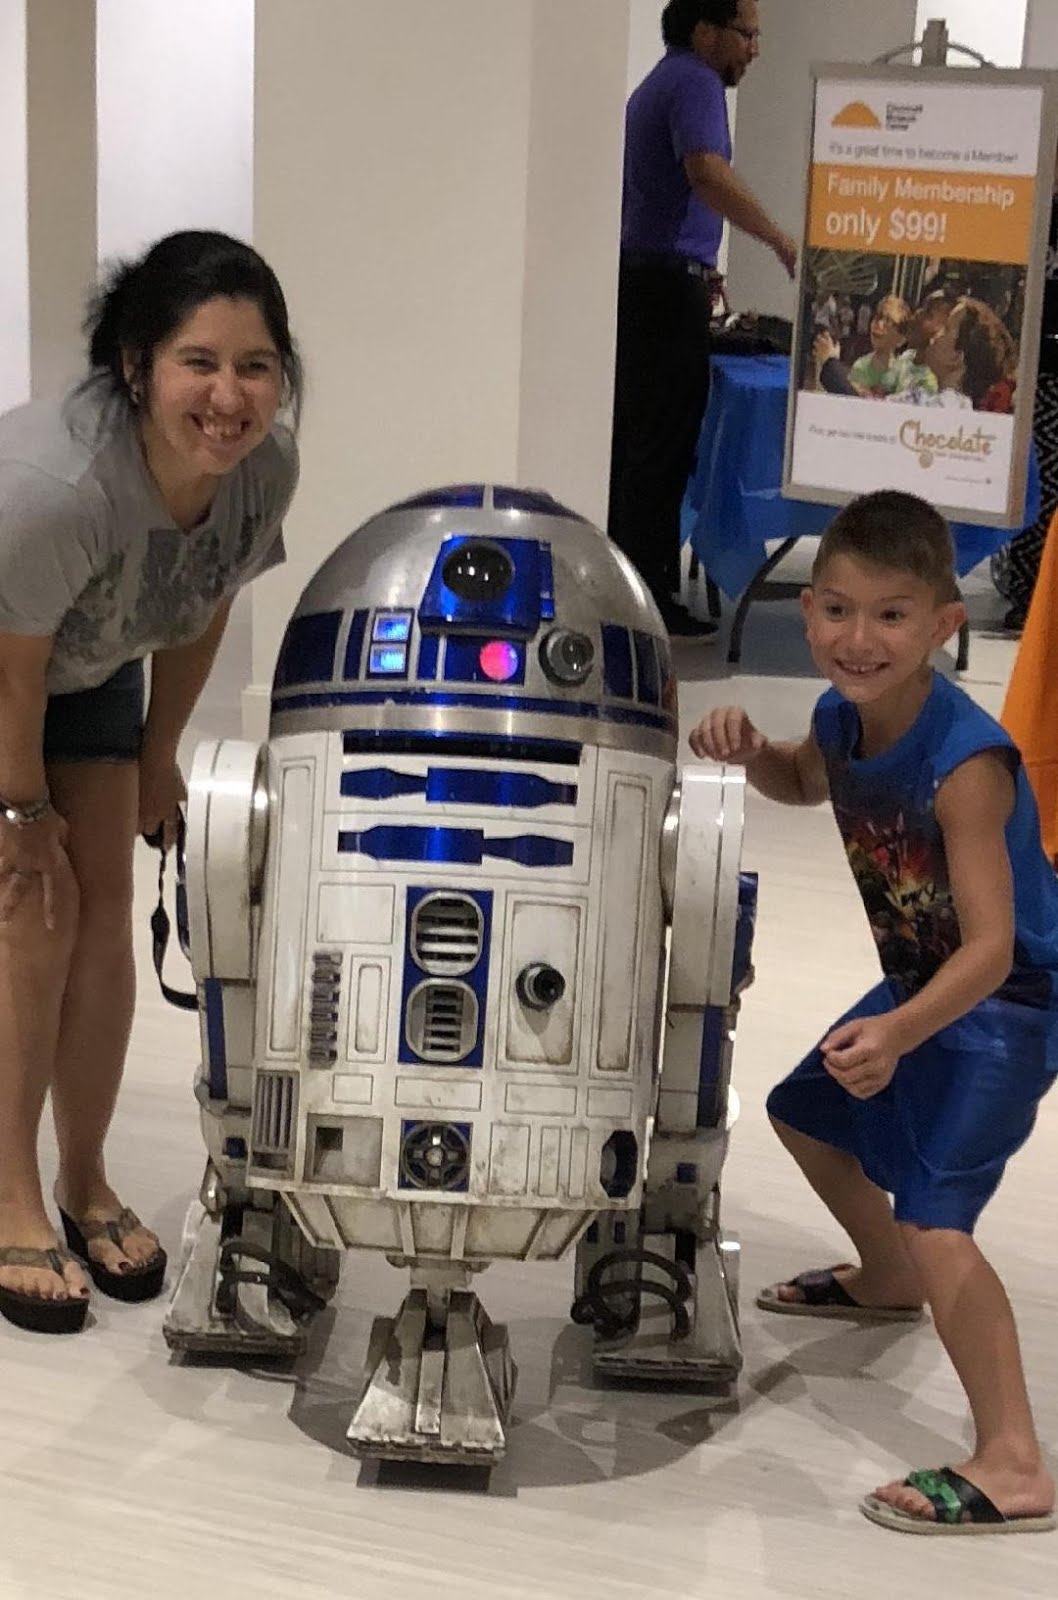 My sister, her son and R2-D2